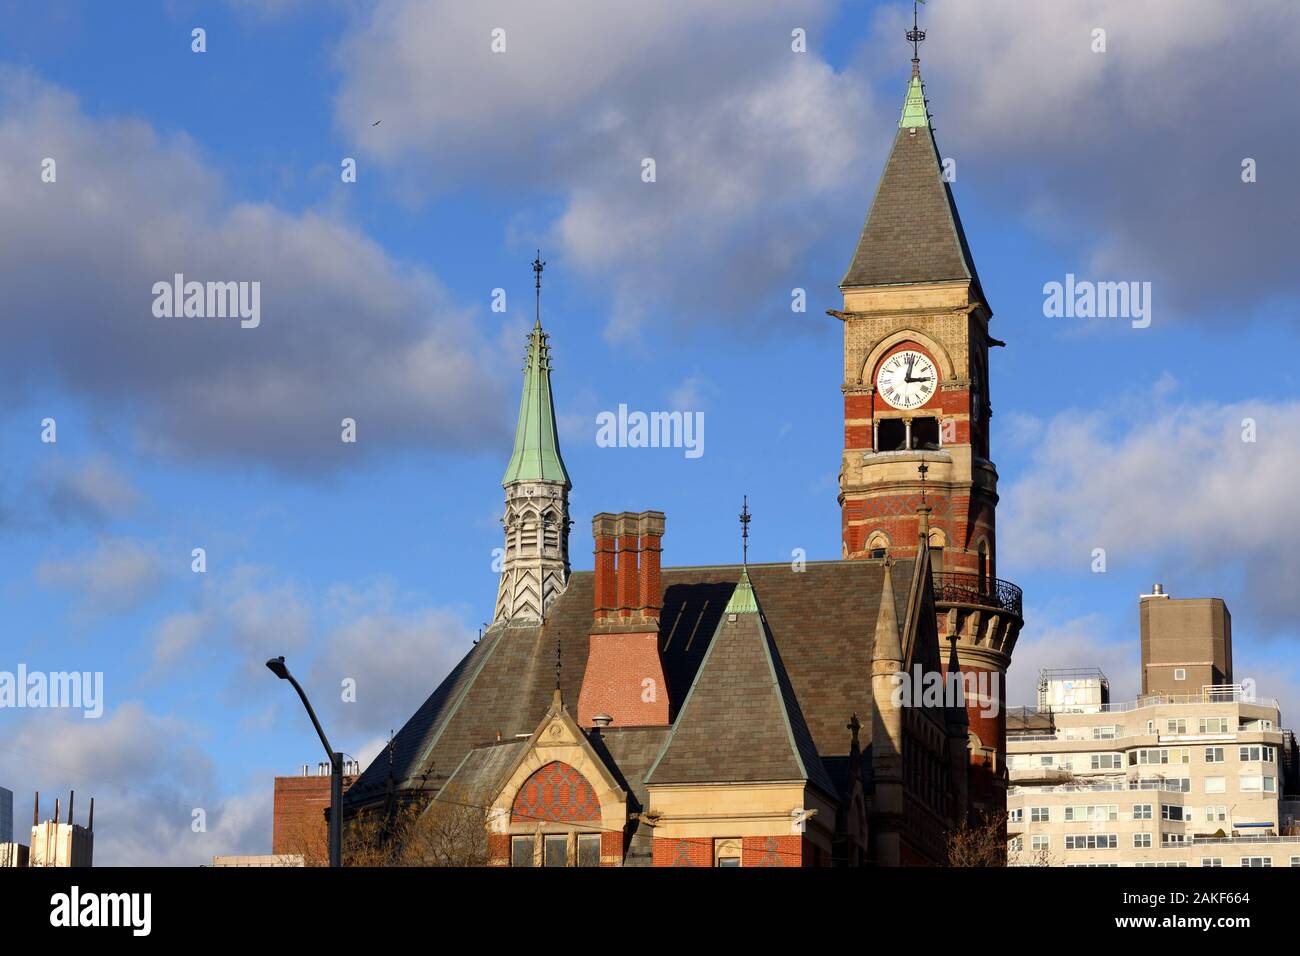 Jefferson Market Library on a partly cloudy day, New York, NY. exterior of a historic building in the Greenwich Village neighborhood of Manhattan. Stock Photo